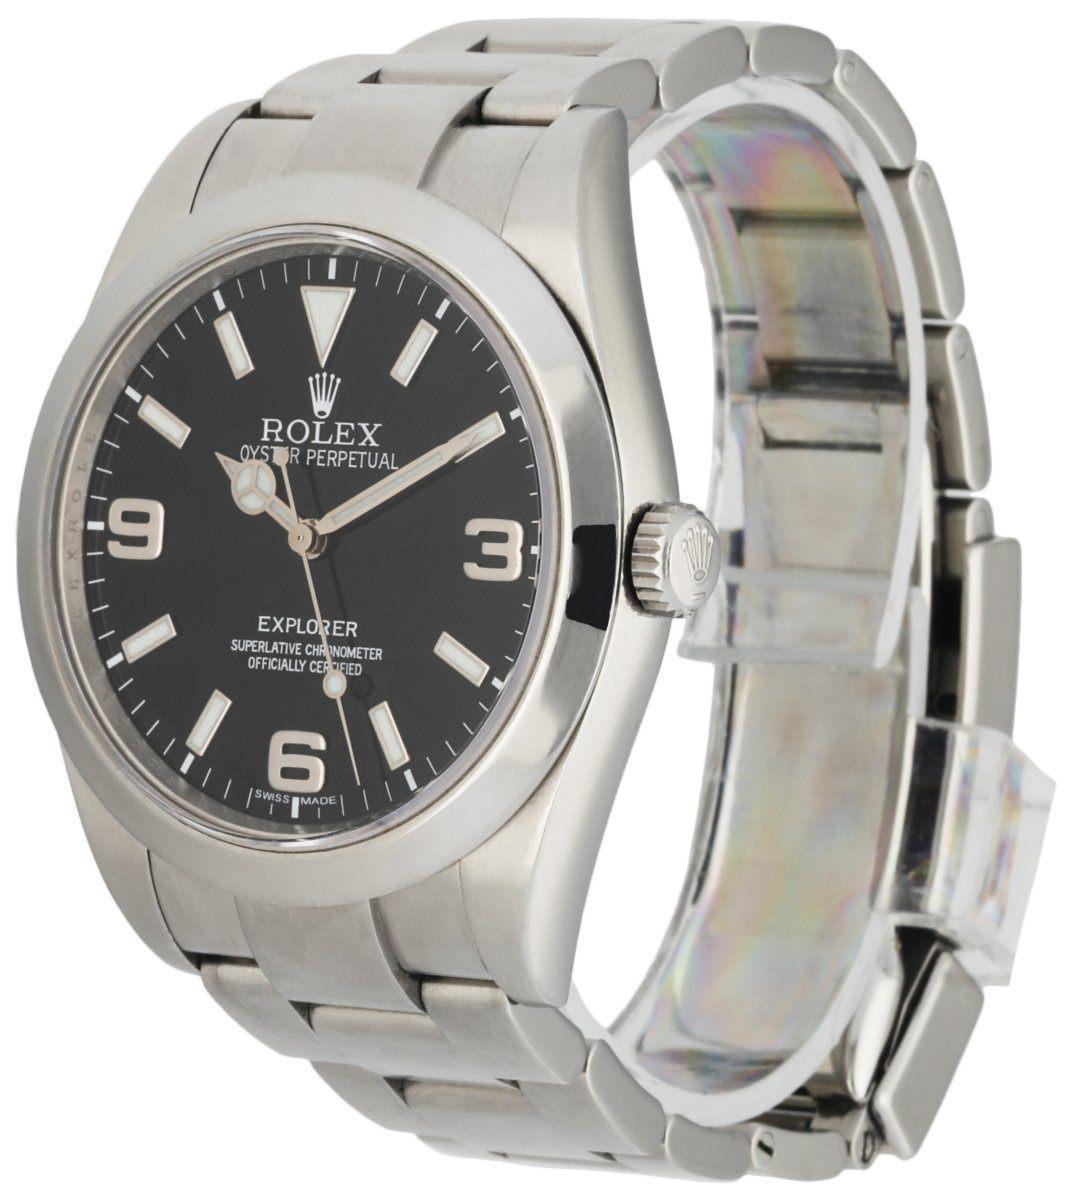 Rolex Explorer 214270 Men's Watch. 39mm Stainless Steel case. Stainless Steel smooth bezel. Black dial with Luminous Steel hands and index & Arabic numeral hour markers. Minute markers on the outer dial. Engraved rehaut. Stainless Steel Bracelet